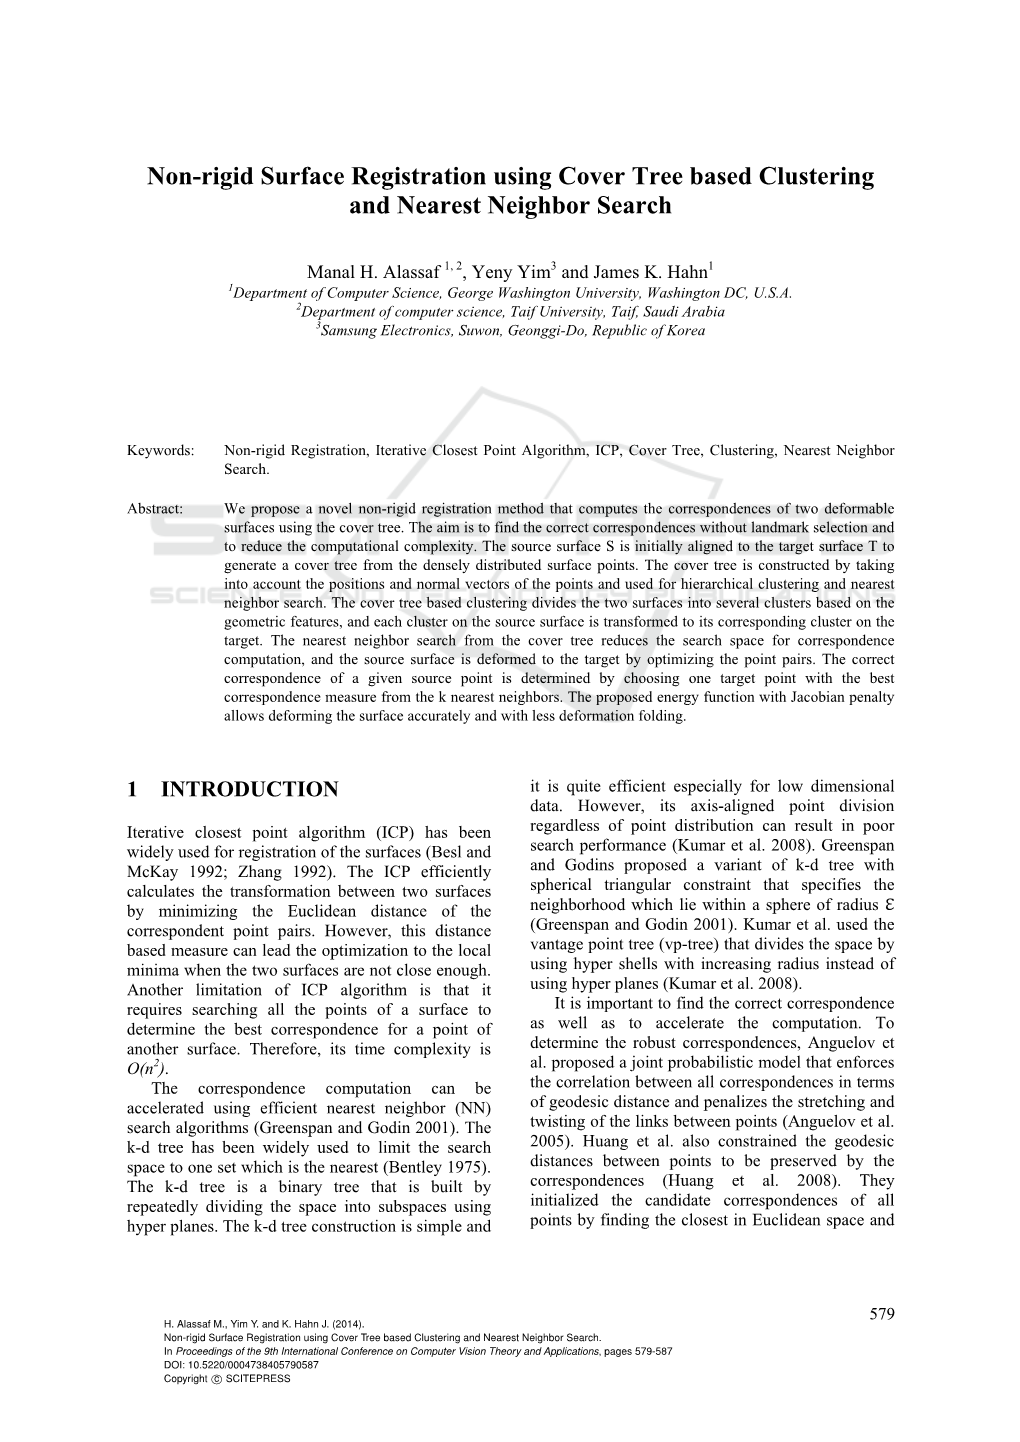 Non-Rigid Surface Registration Using Cover Tree Based Clustering and Nearest Neighbor Search